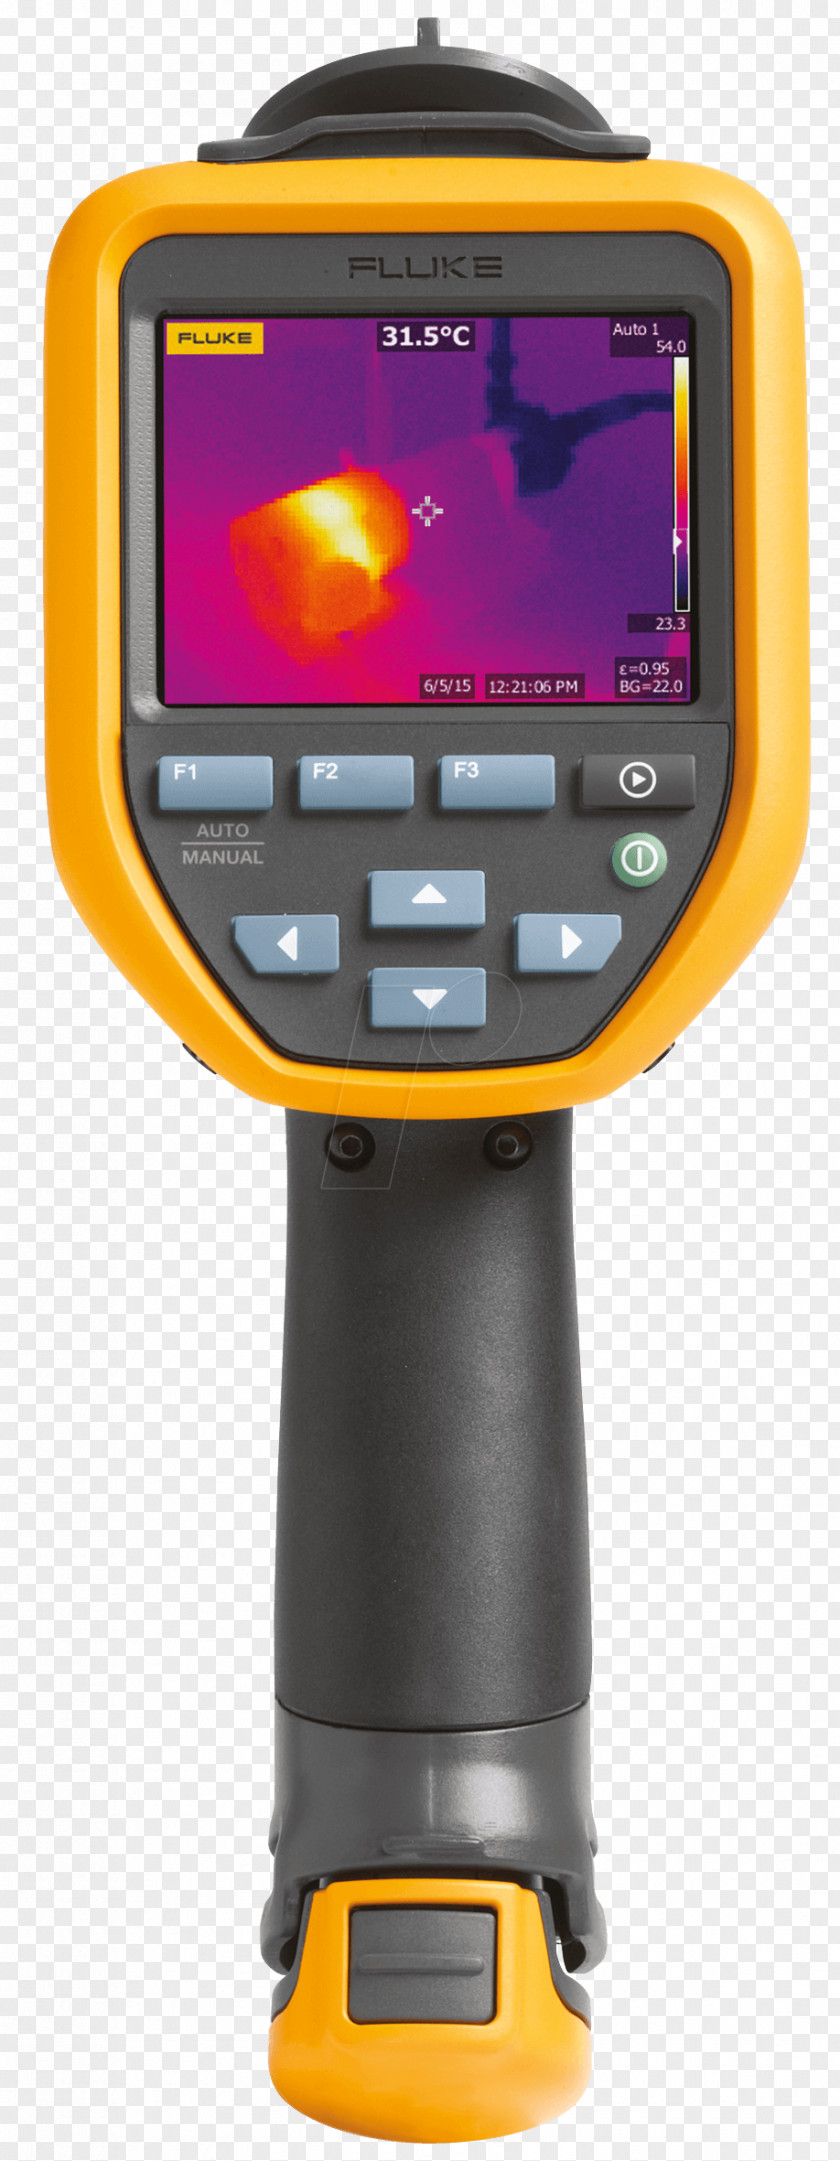 Electronic Scales Thermographic Camera Fluke Corporation Thermography Thermal Imaging PNG